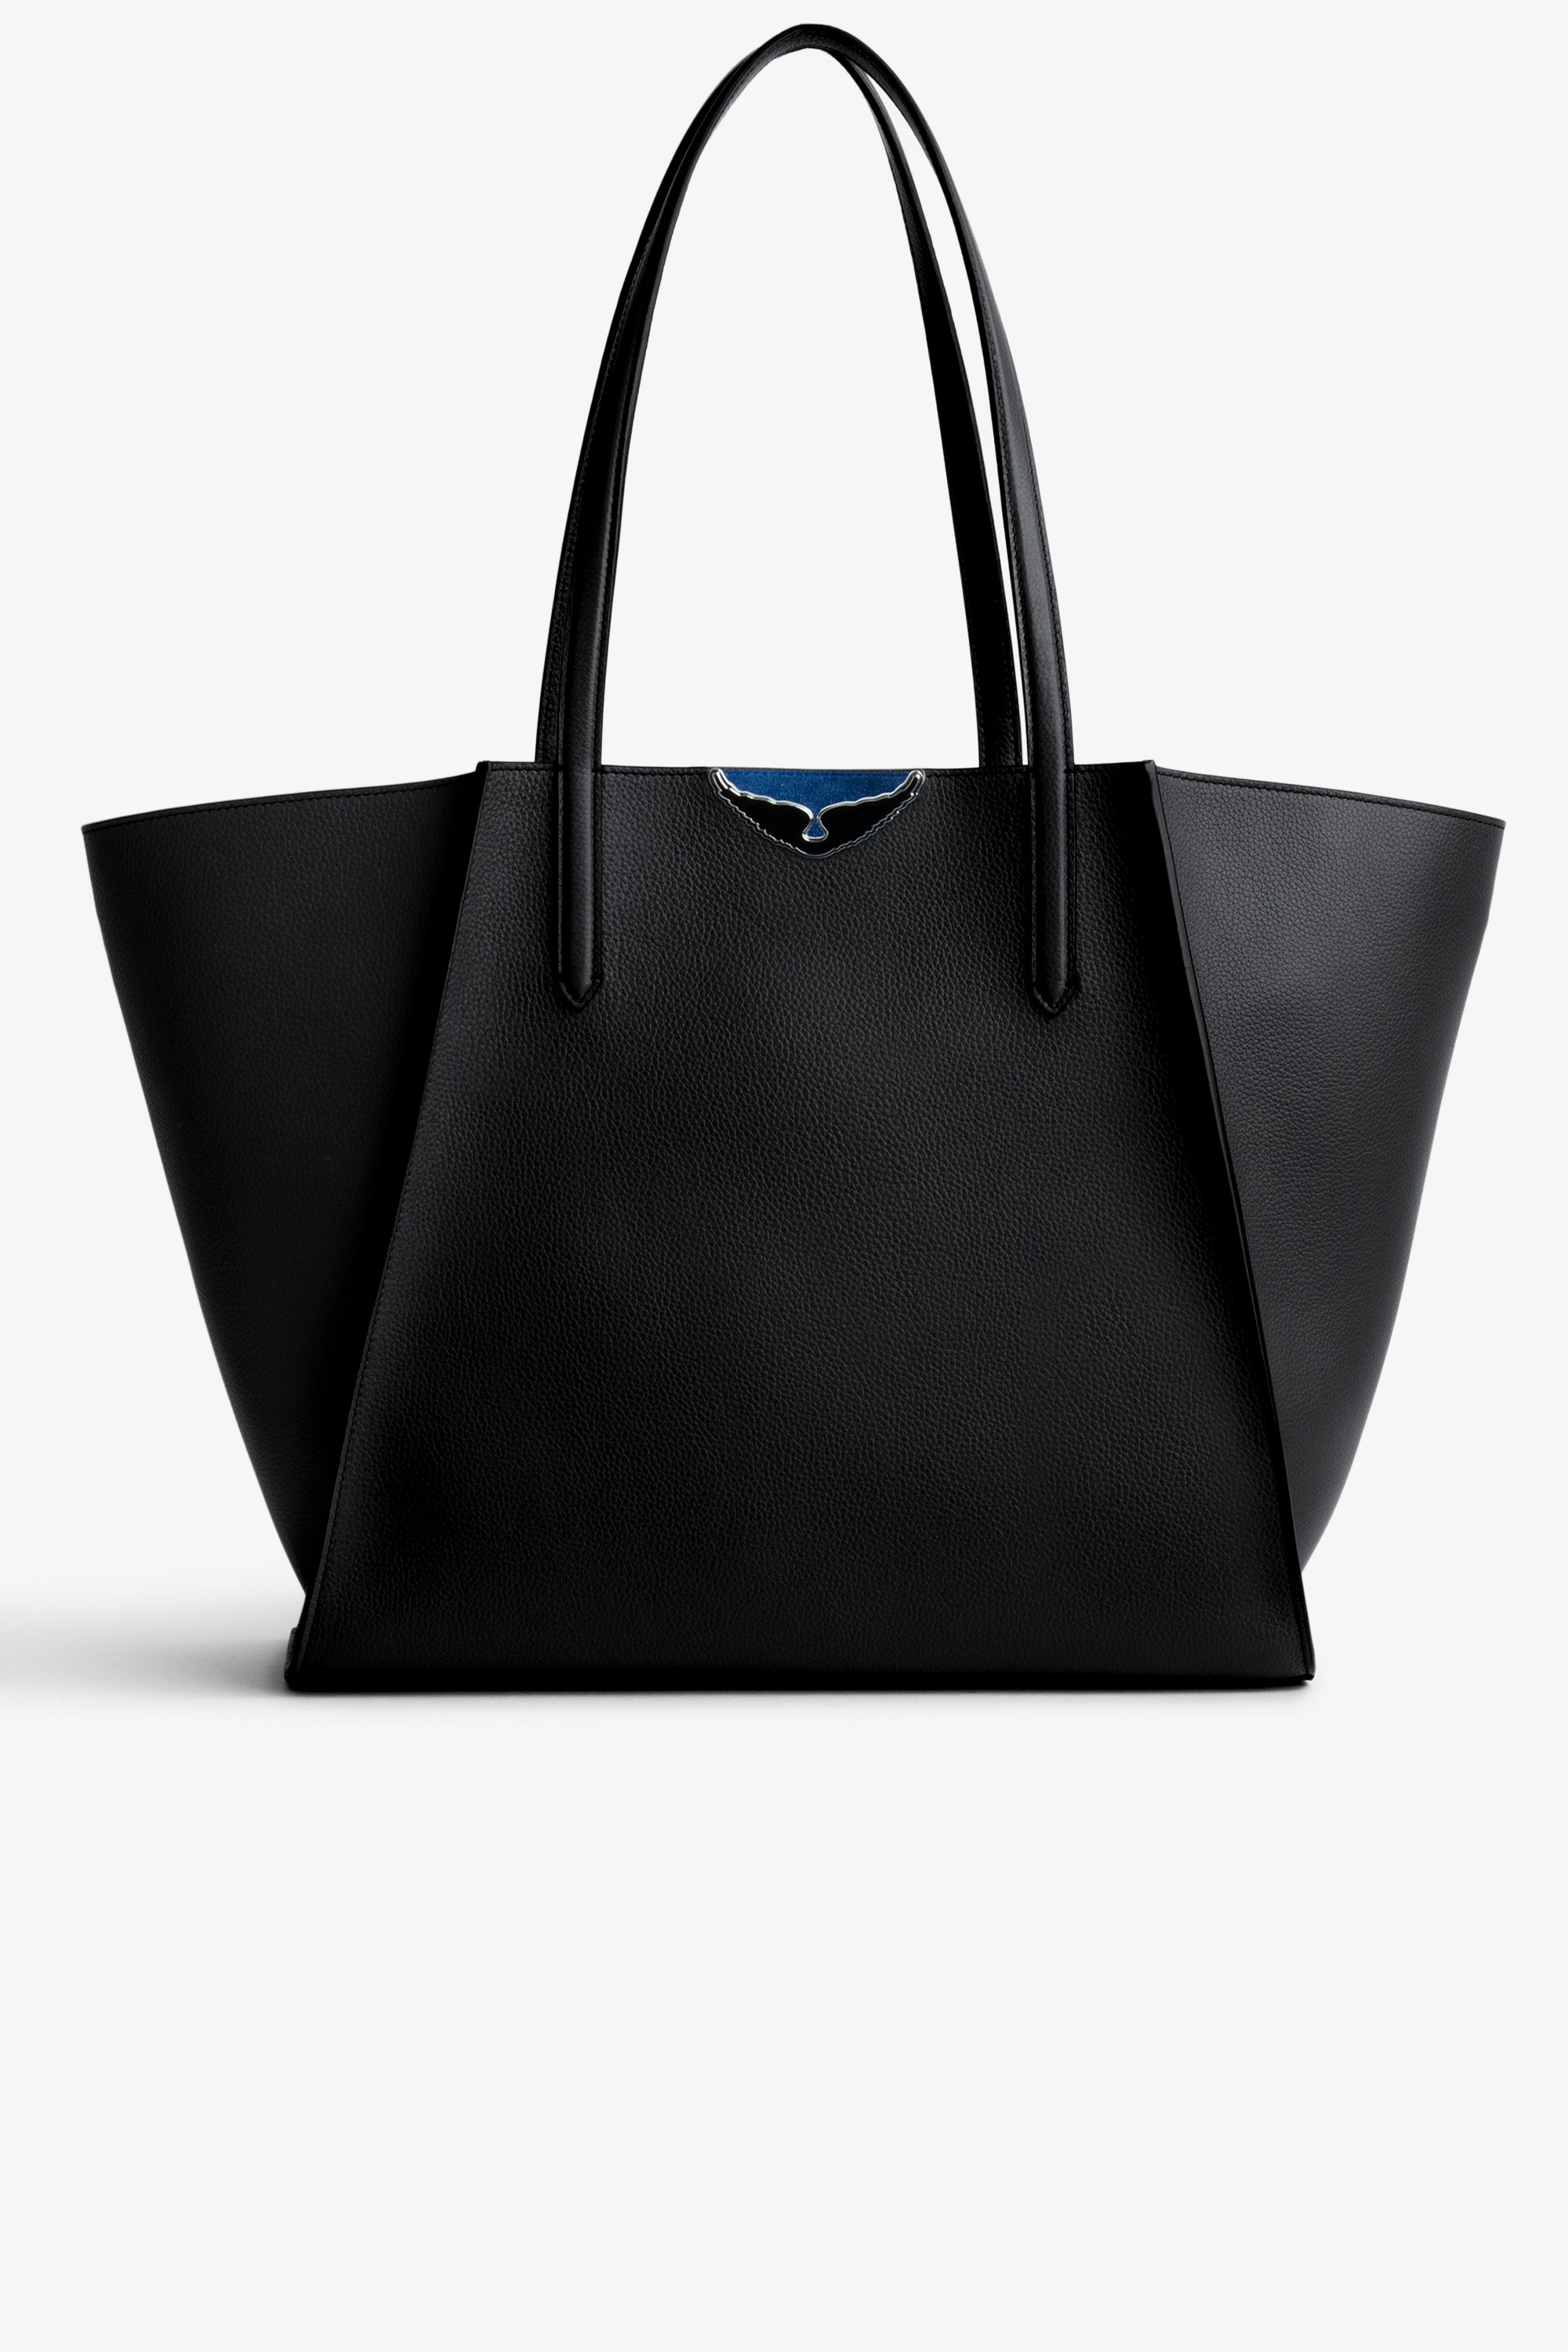 Le Borderline Bag Women’s reversible tote bag in black grained leather and blue suede with black lacquered wings